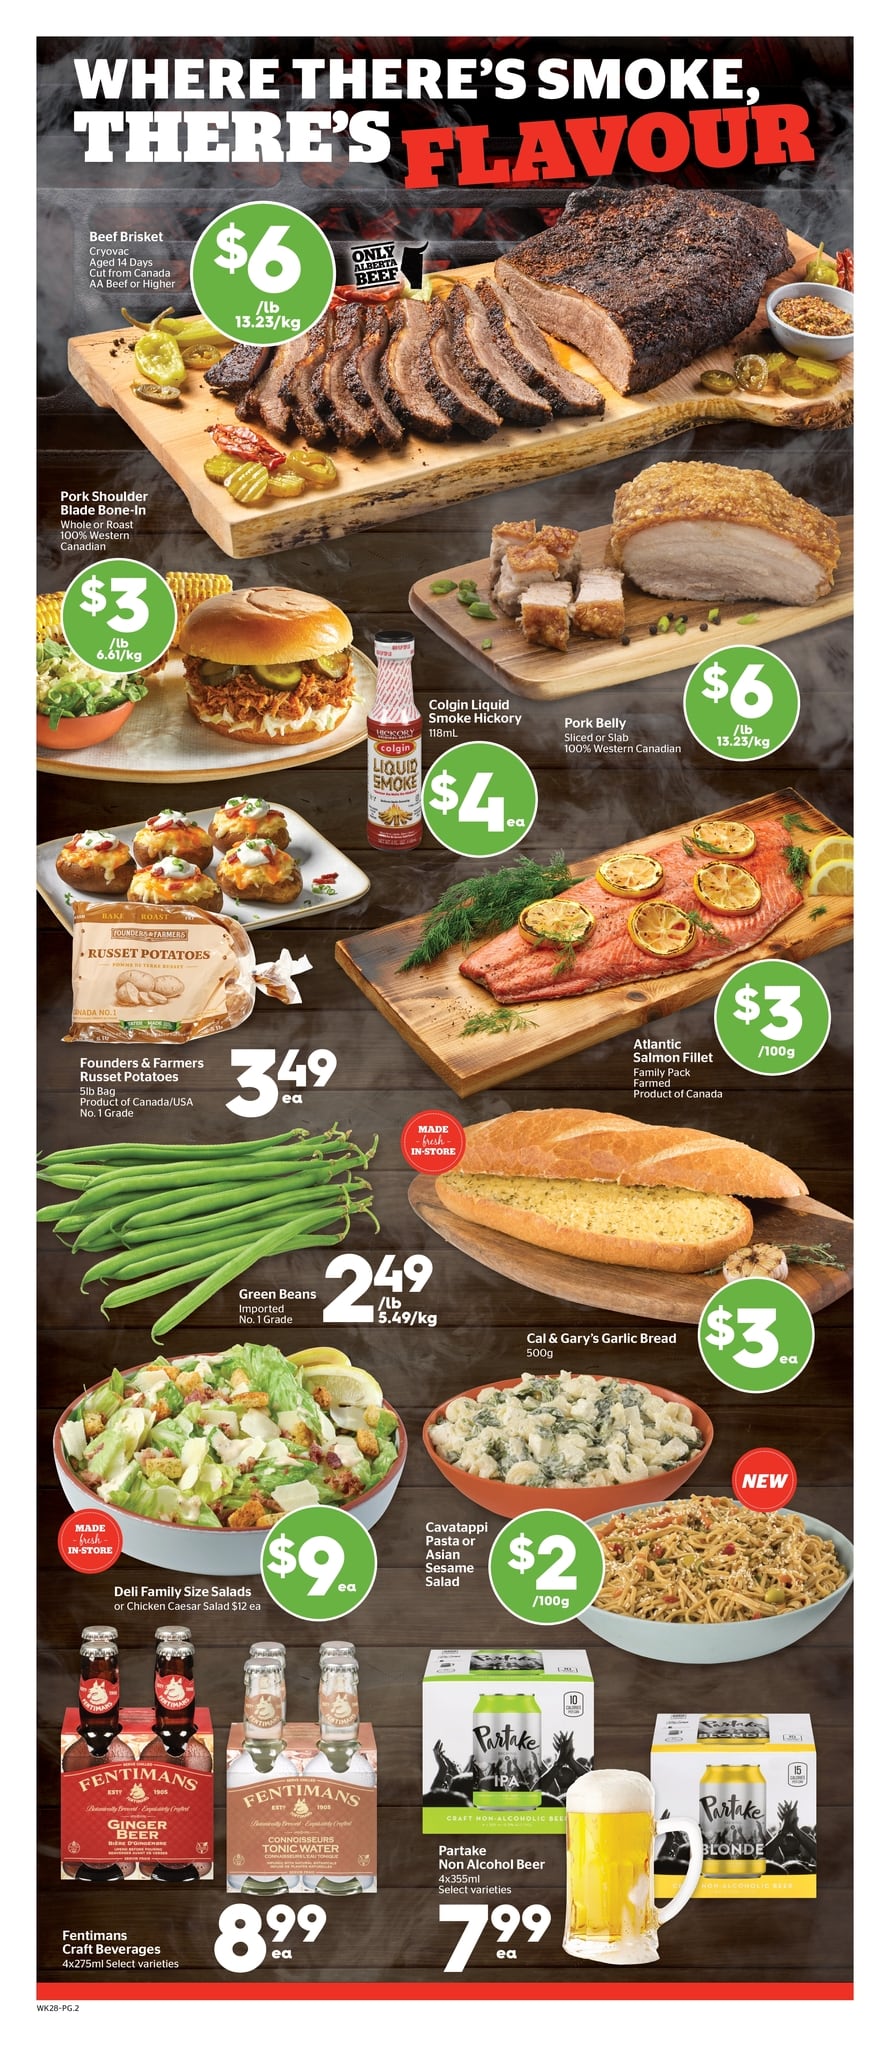 Calgary Co-op - Weekly Flyer Specials - Page 2